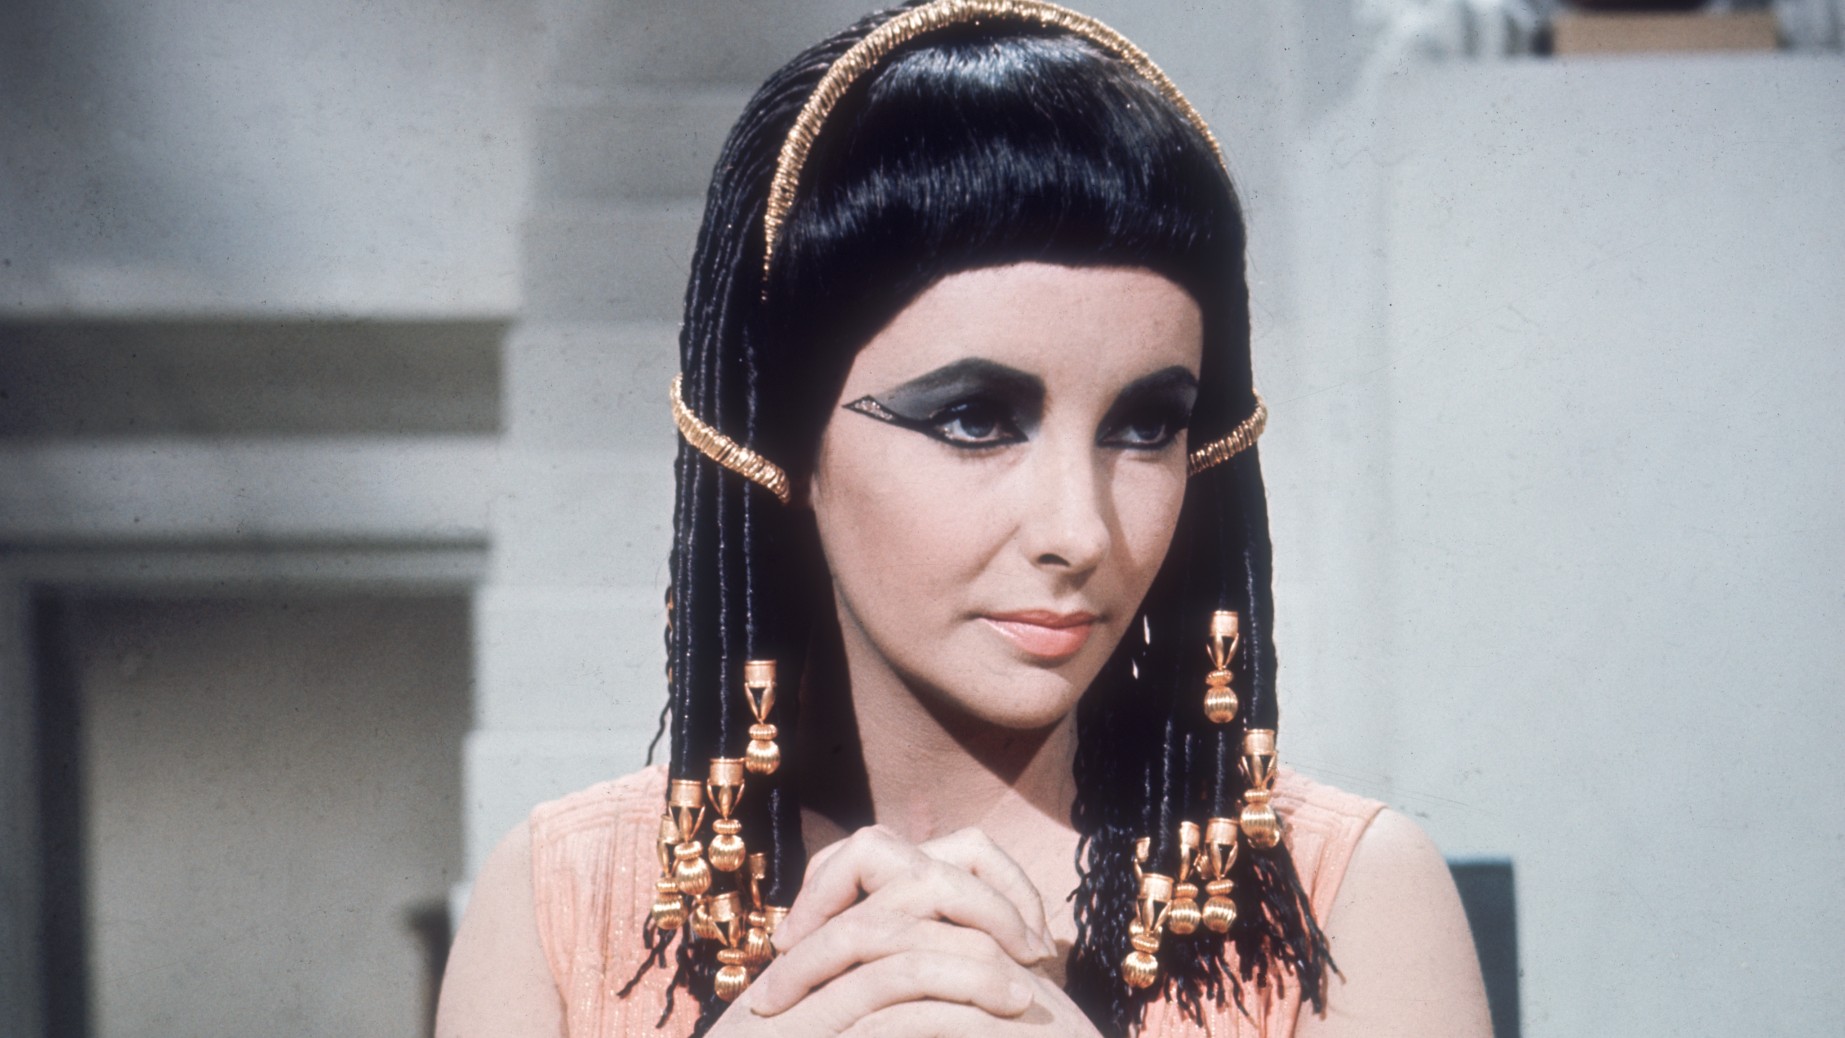 Elizabeth Taylor playing one of her most famous roles, that of Cleopatra in the 1963 film of the same name